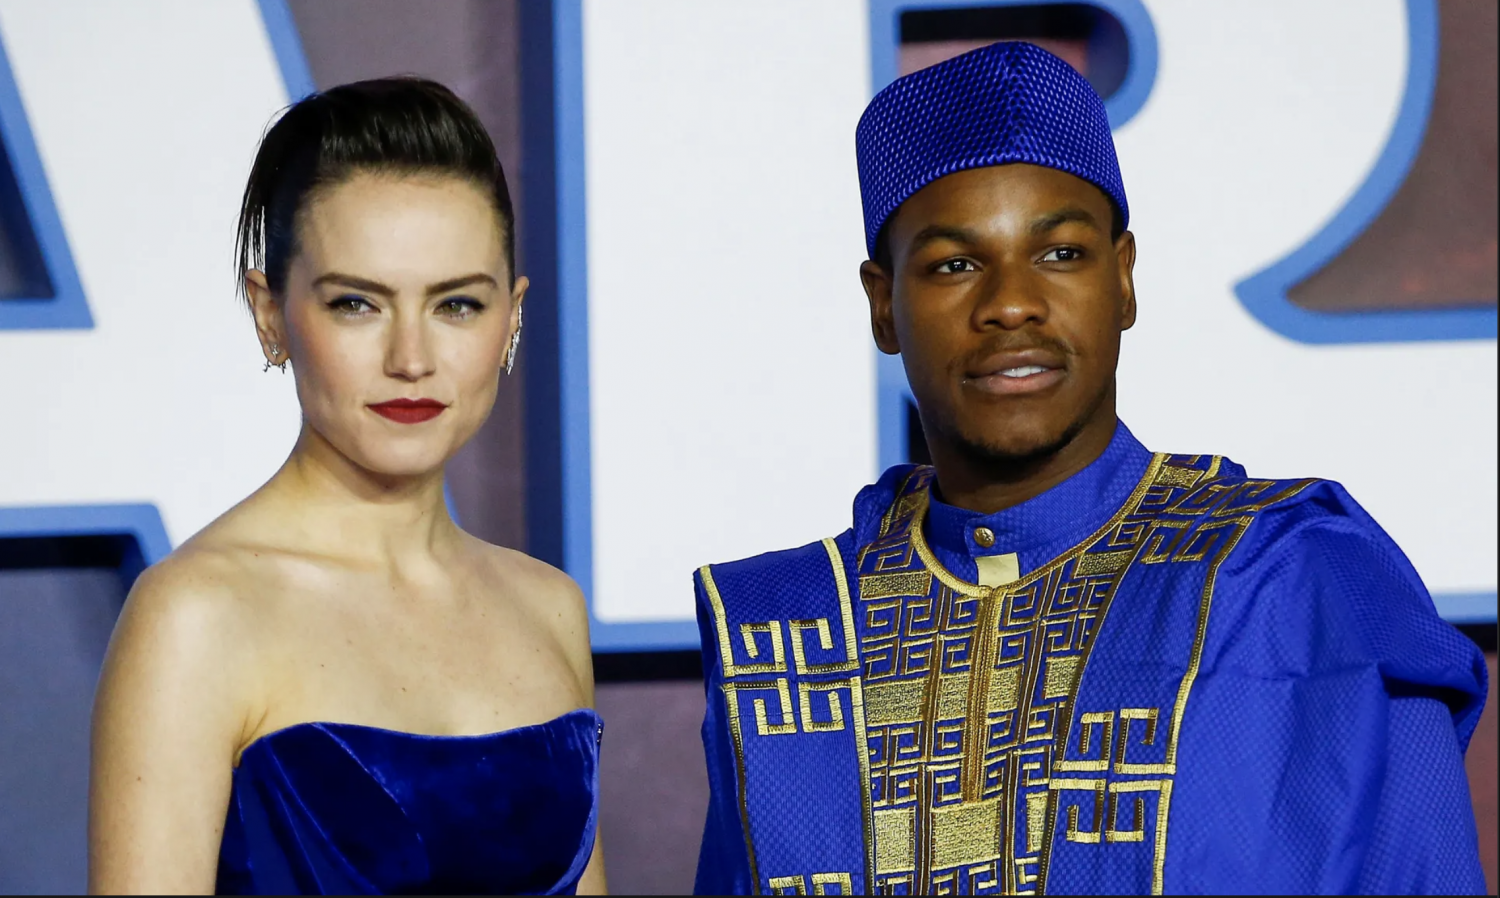 Daisy Ridley and John Boyega pose as they attend the premiere of Star Wars: The Rise of Skywalker in London. Photograph: Henry Nicholls/Reuters